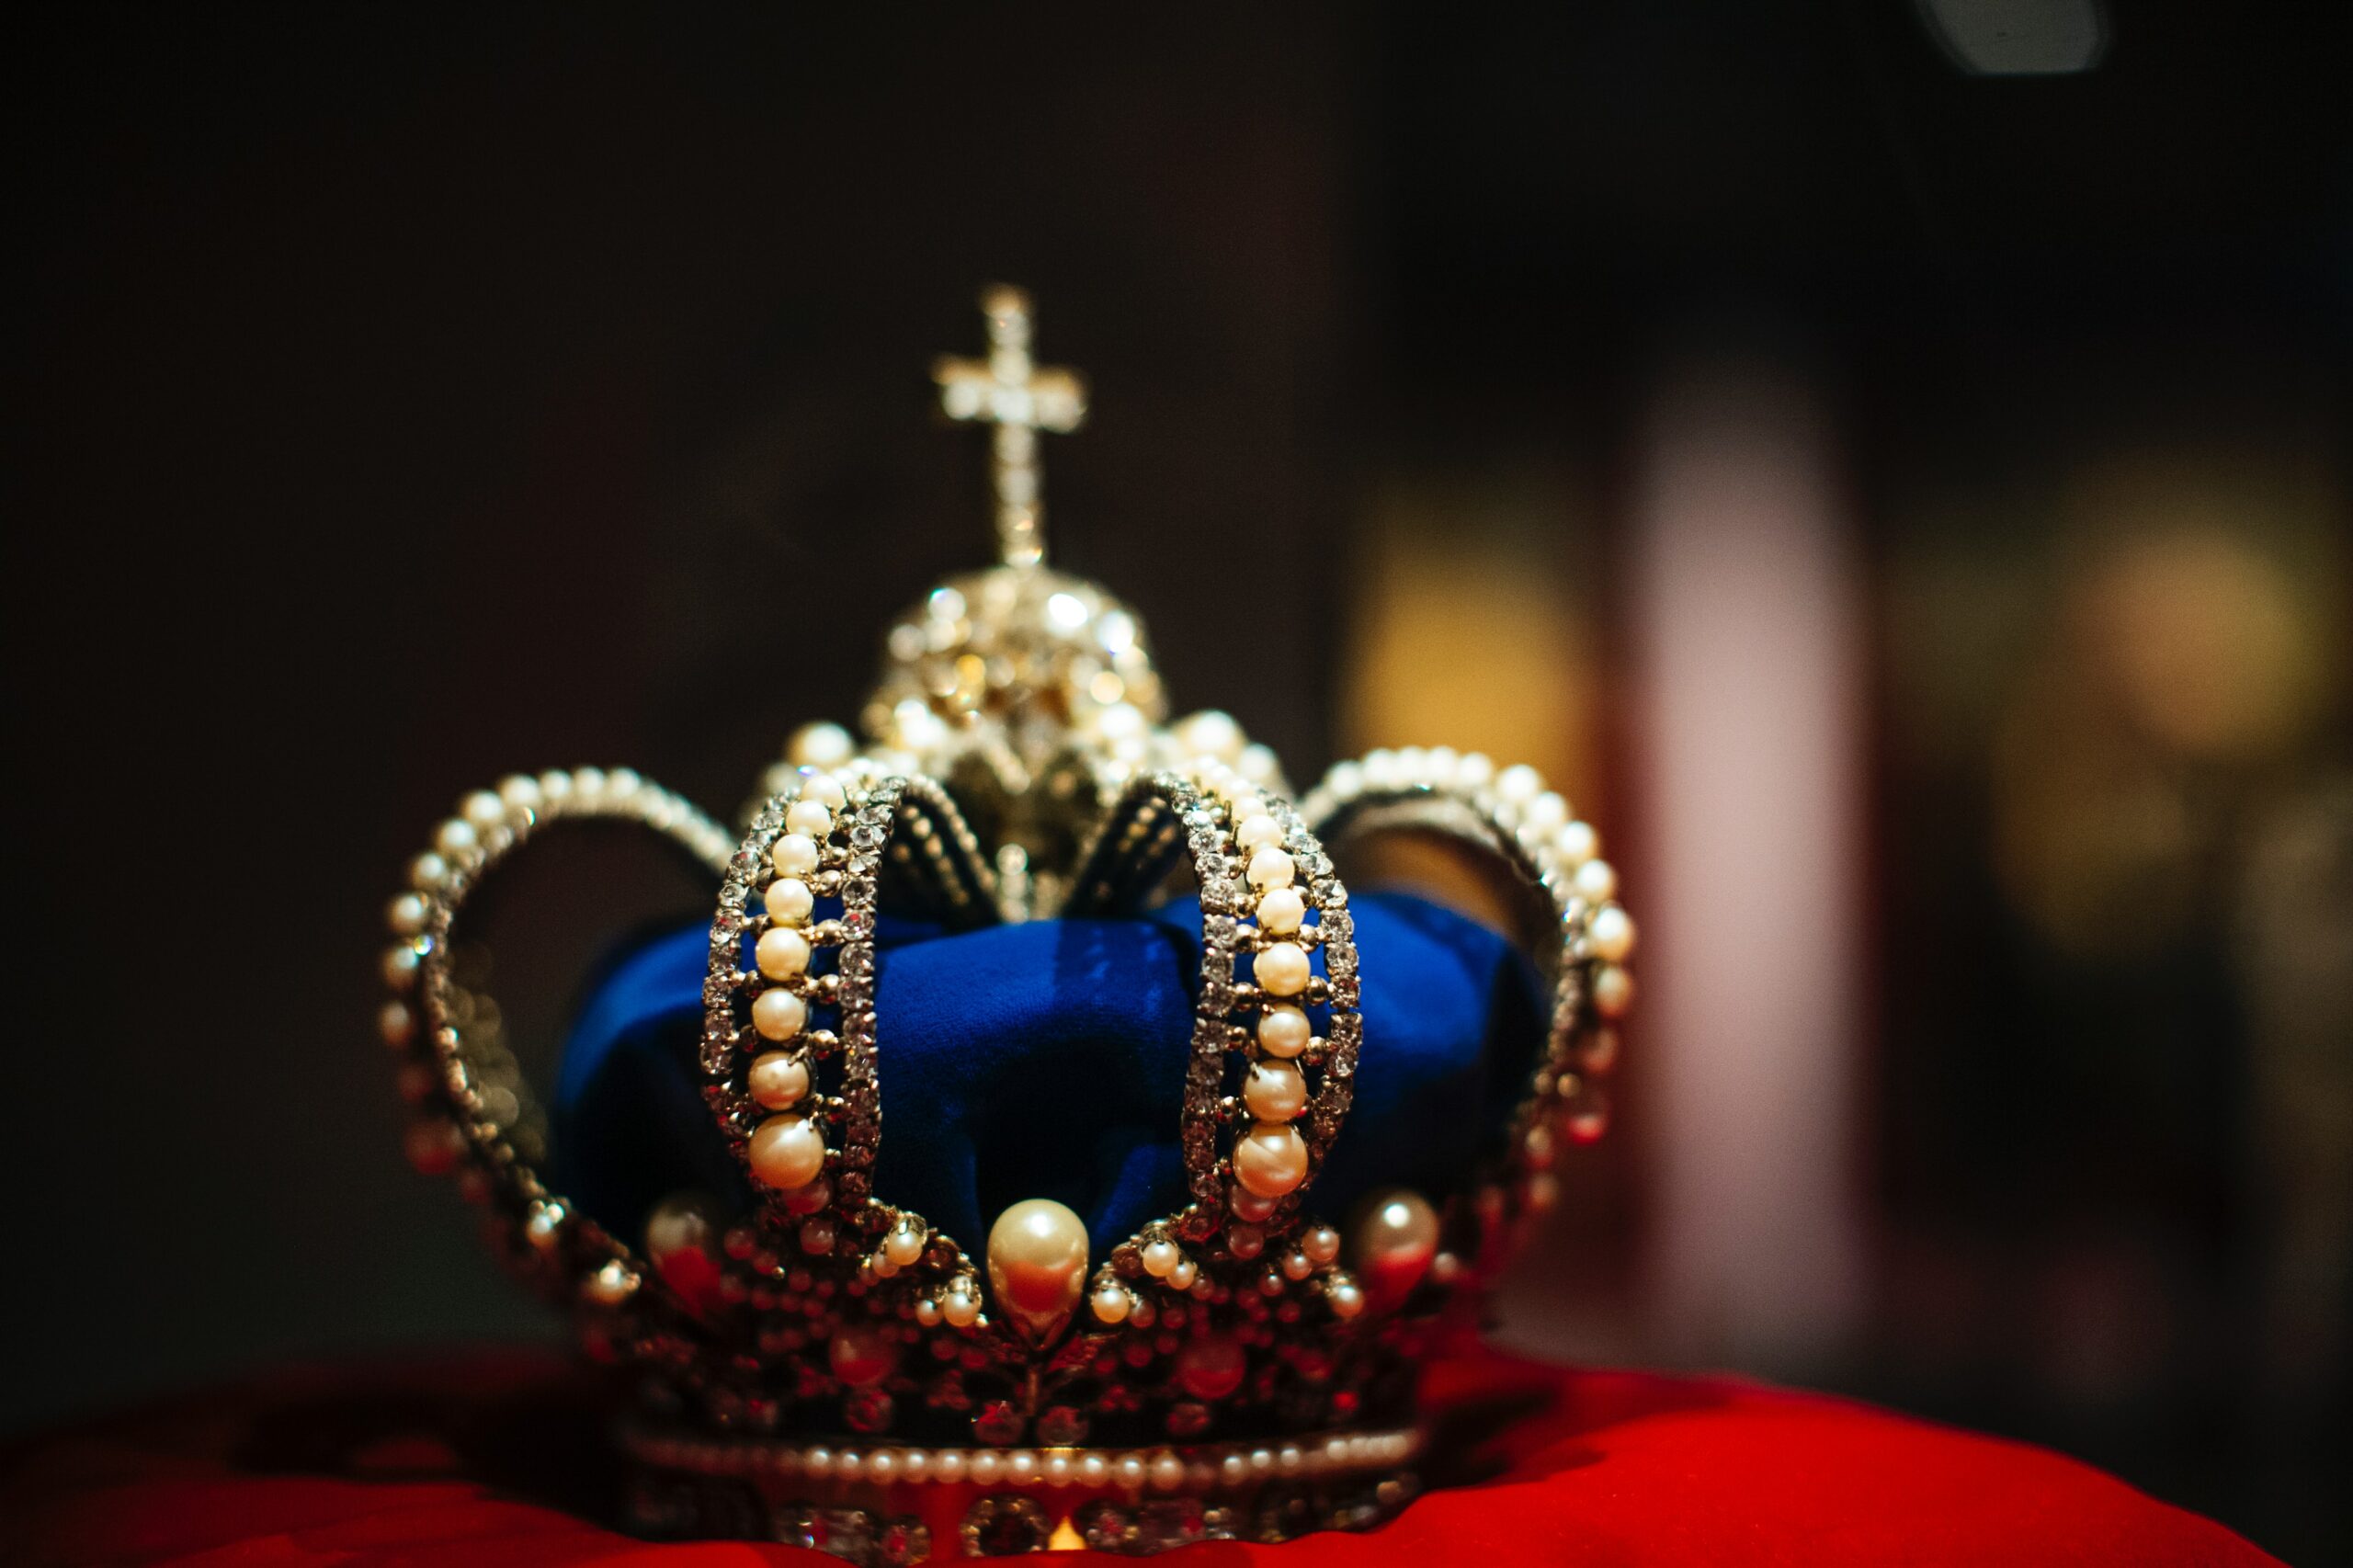 Image of some crown jewels